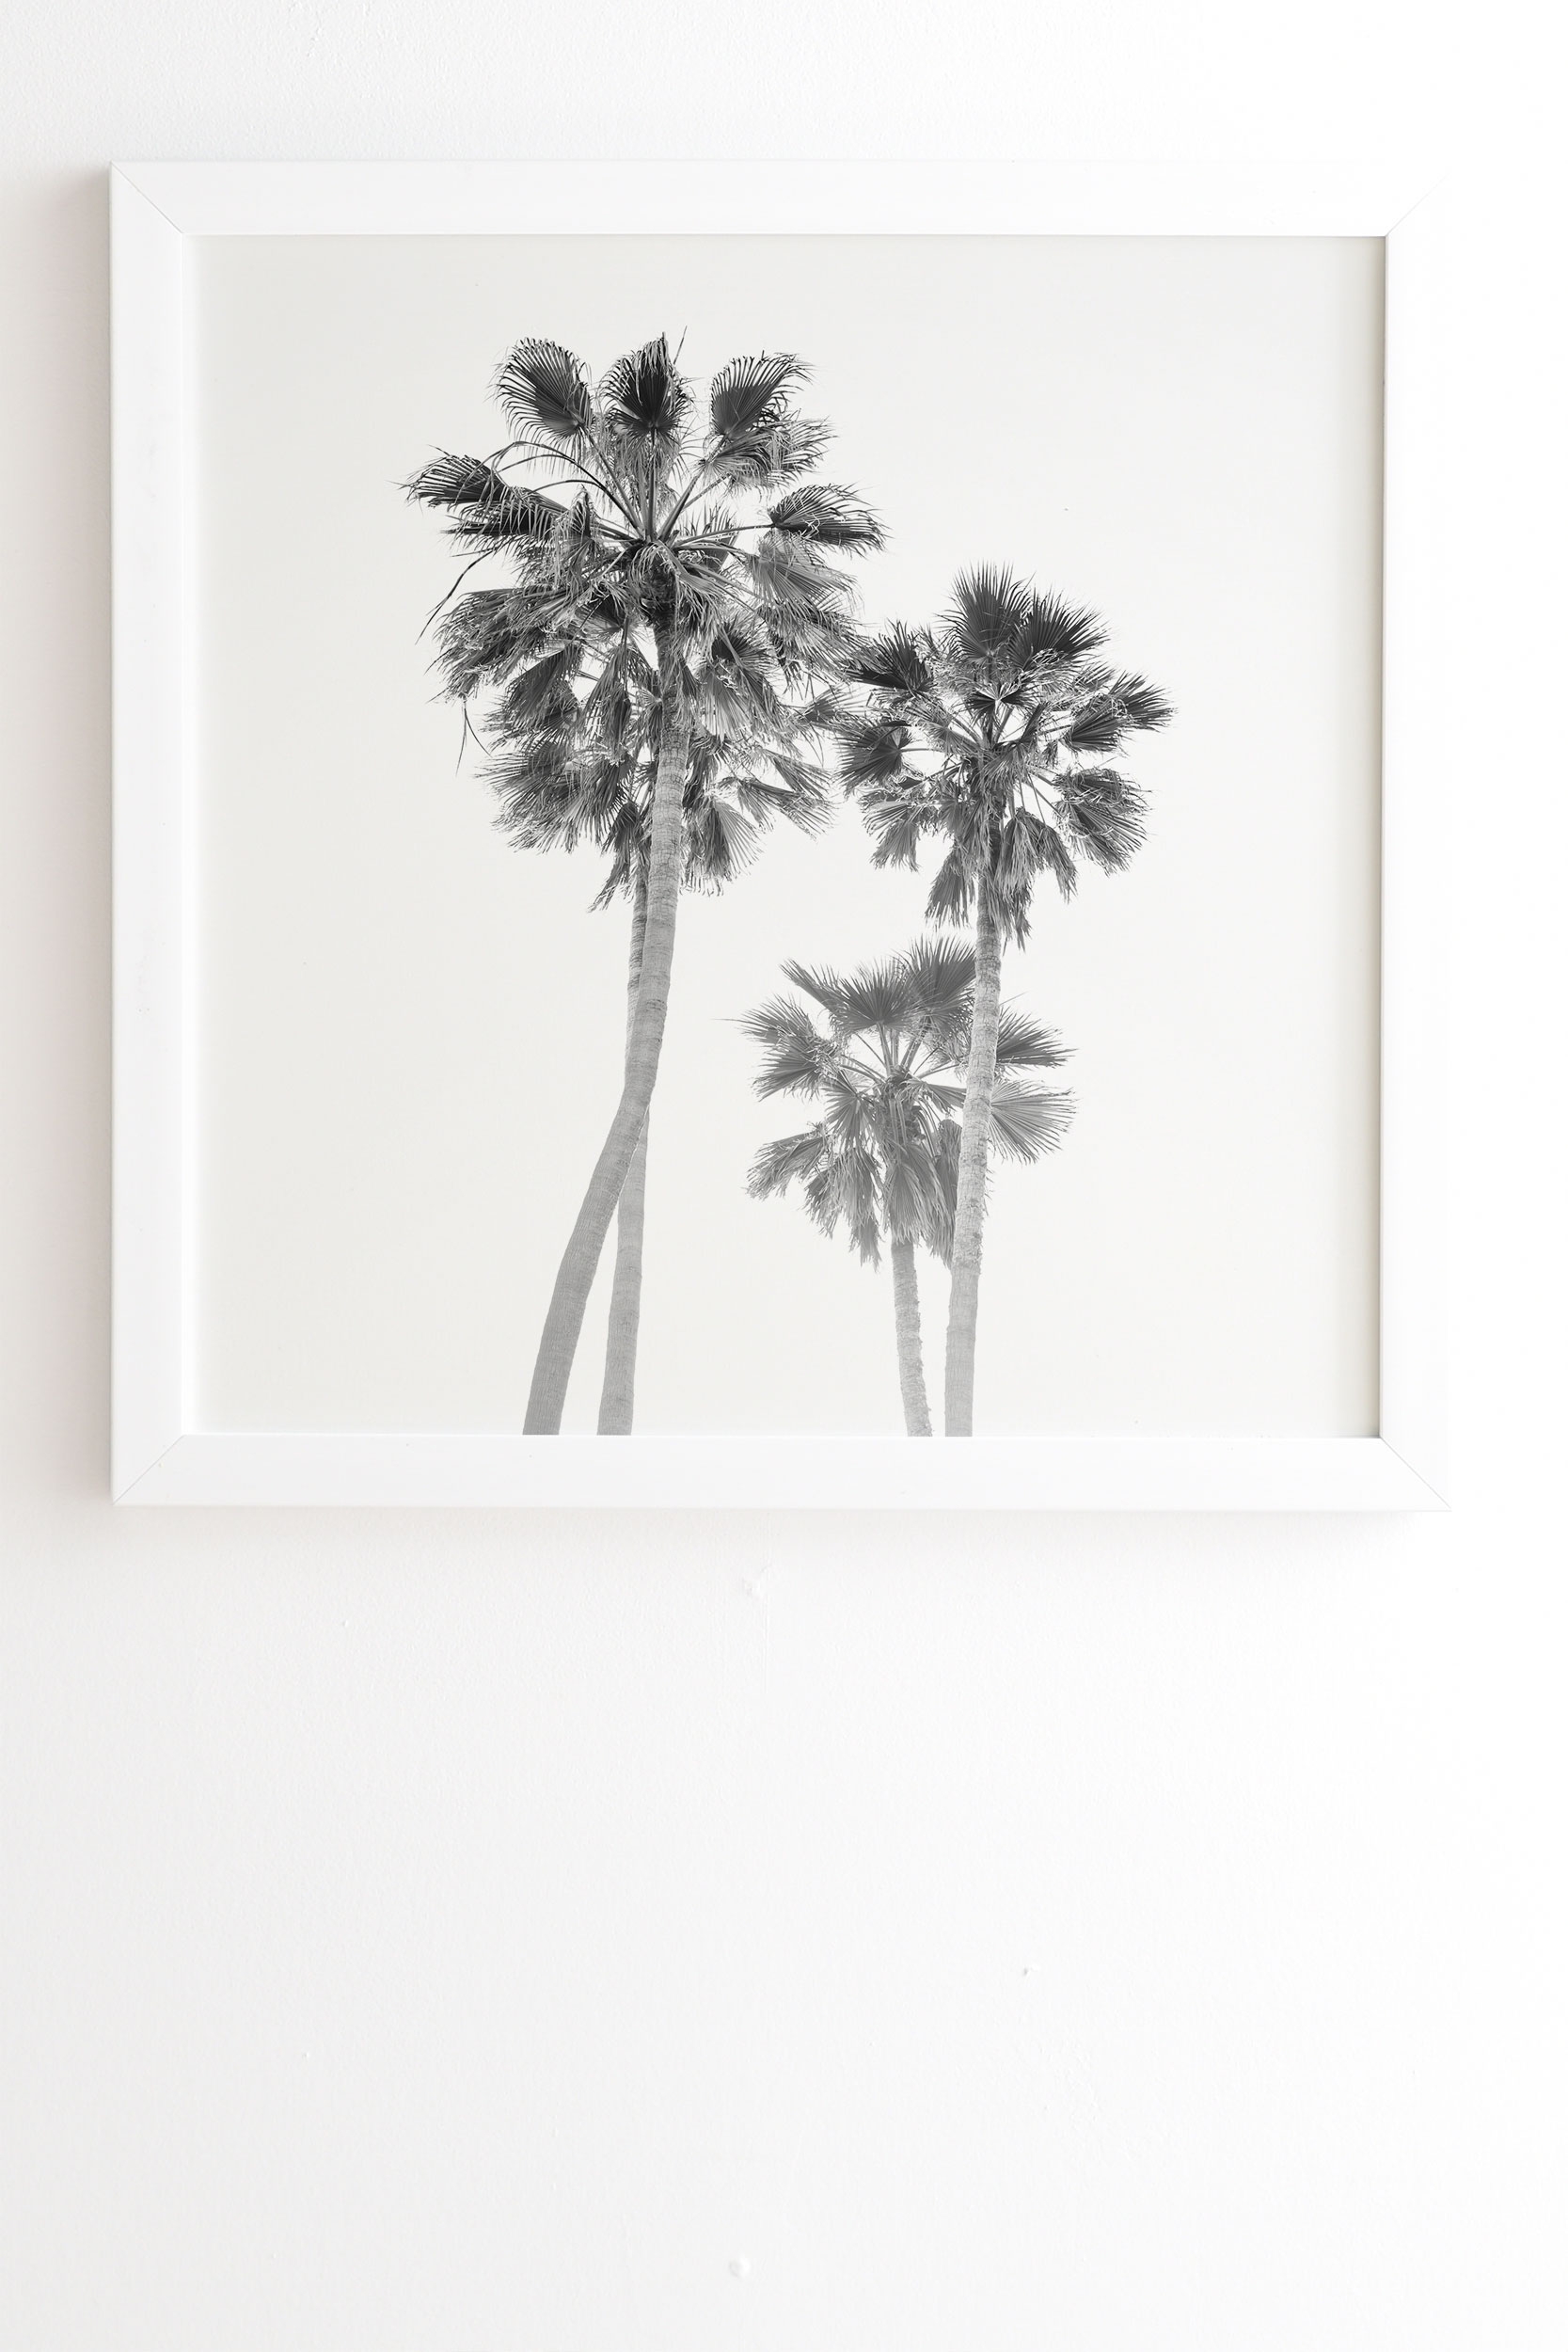 Monochrome California Palms by Bethany Young Photography - Framed Wall Art Basic White 20" x 20" - Image 1